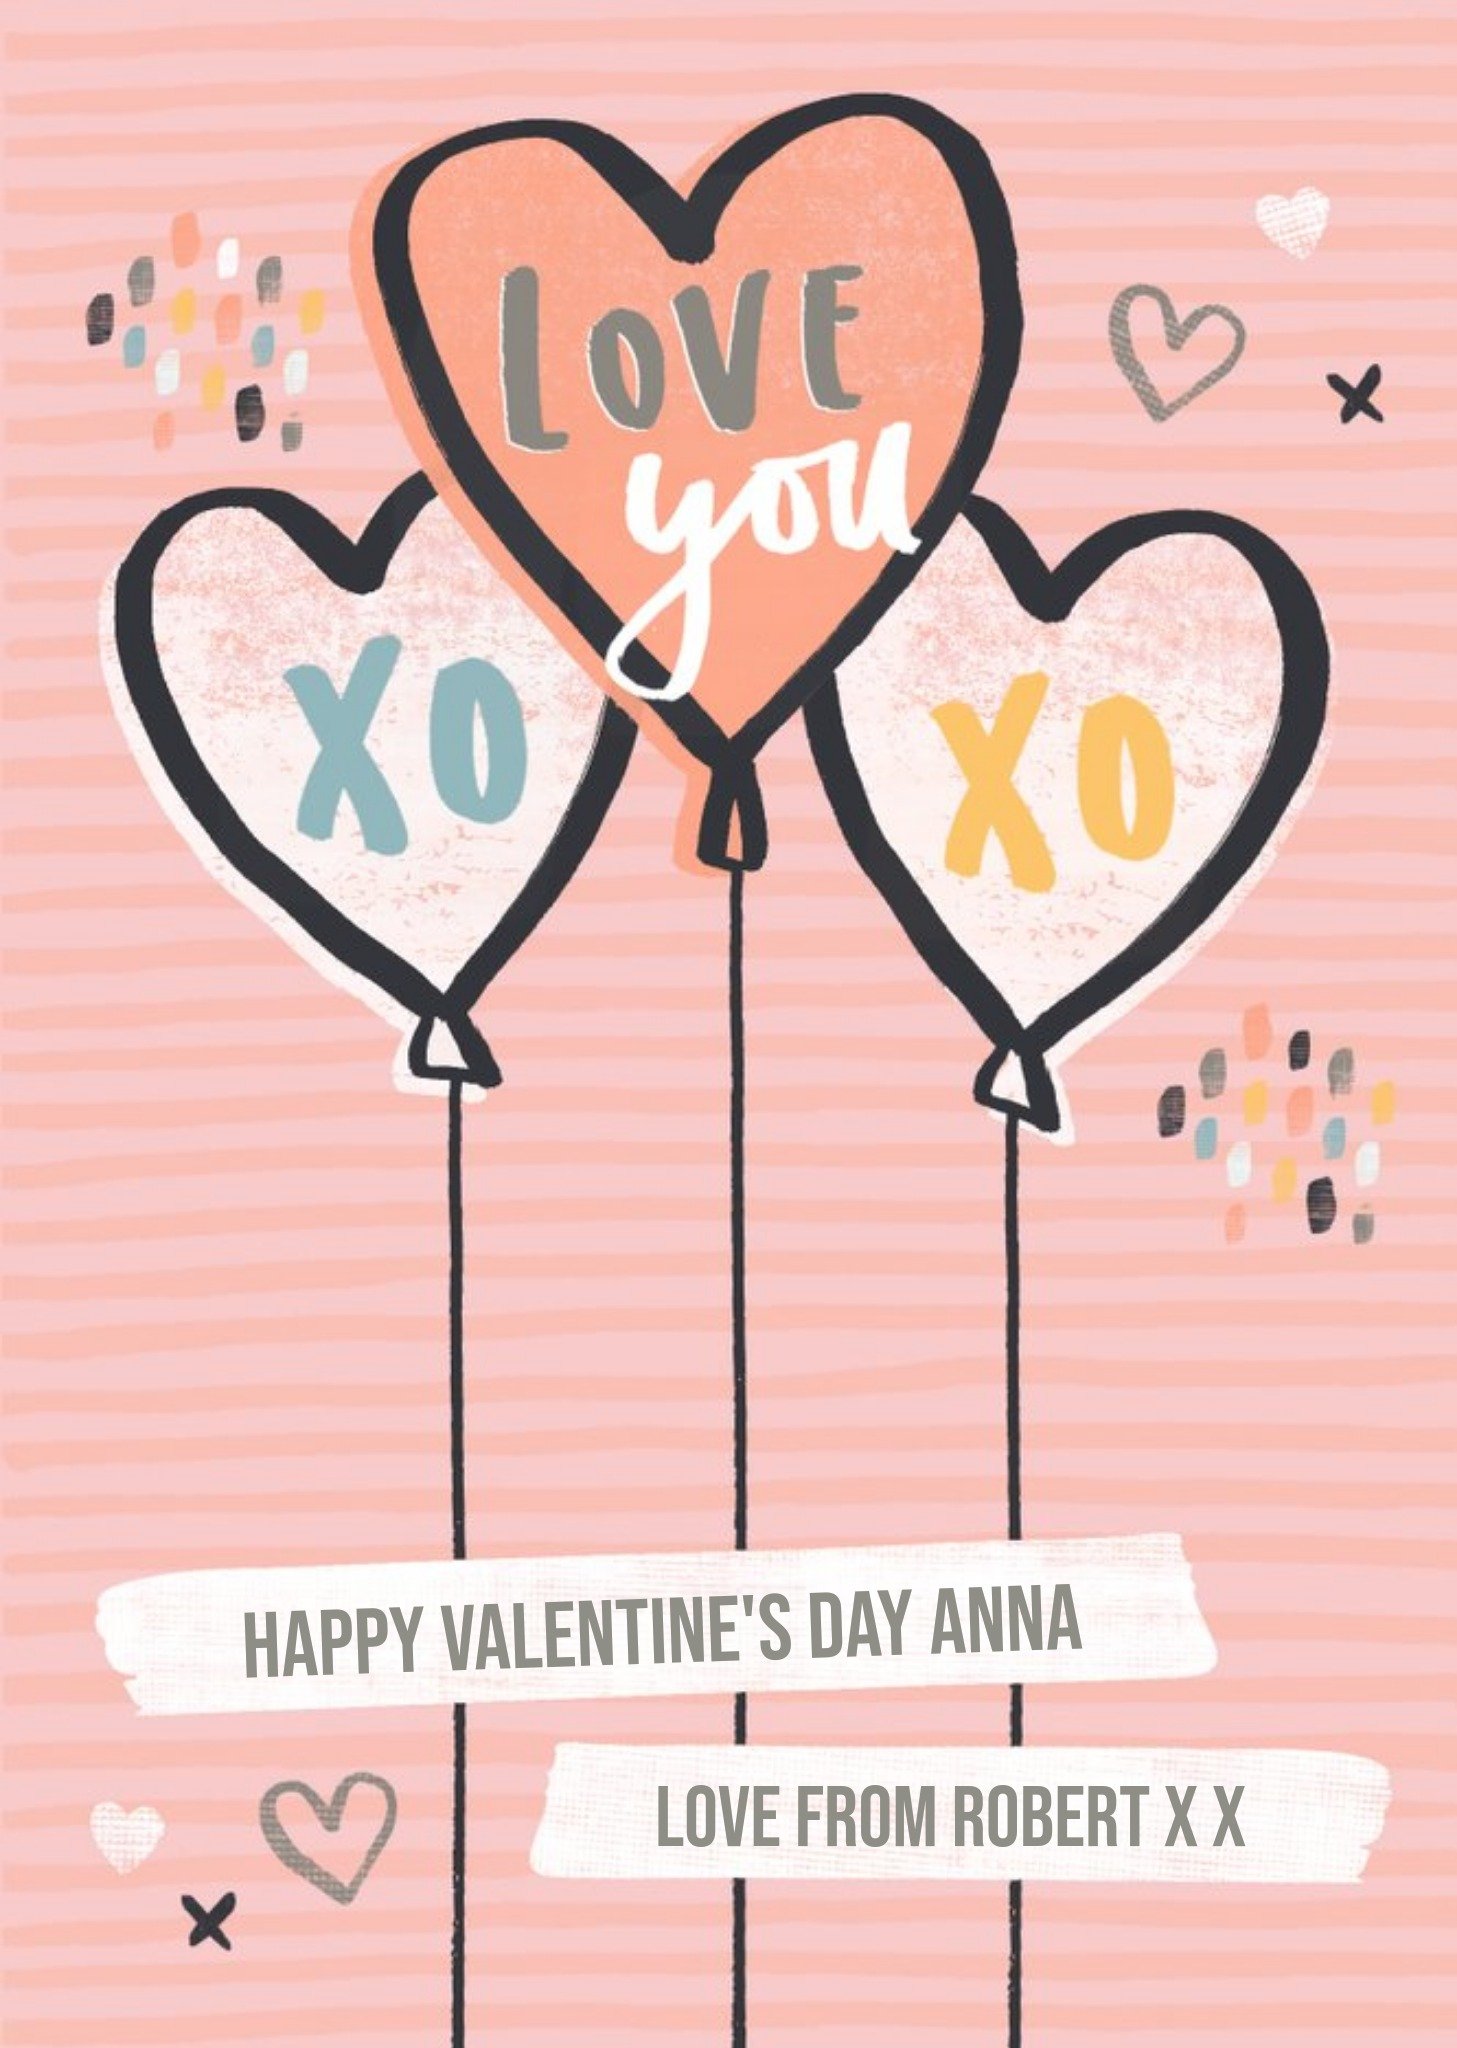 Moonpig Xo Heart Balloons Personalised Happy Valentine's Day Card For Girlfriend, Large